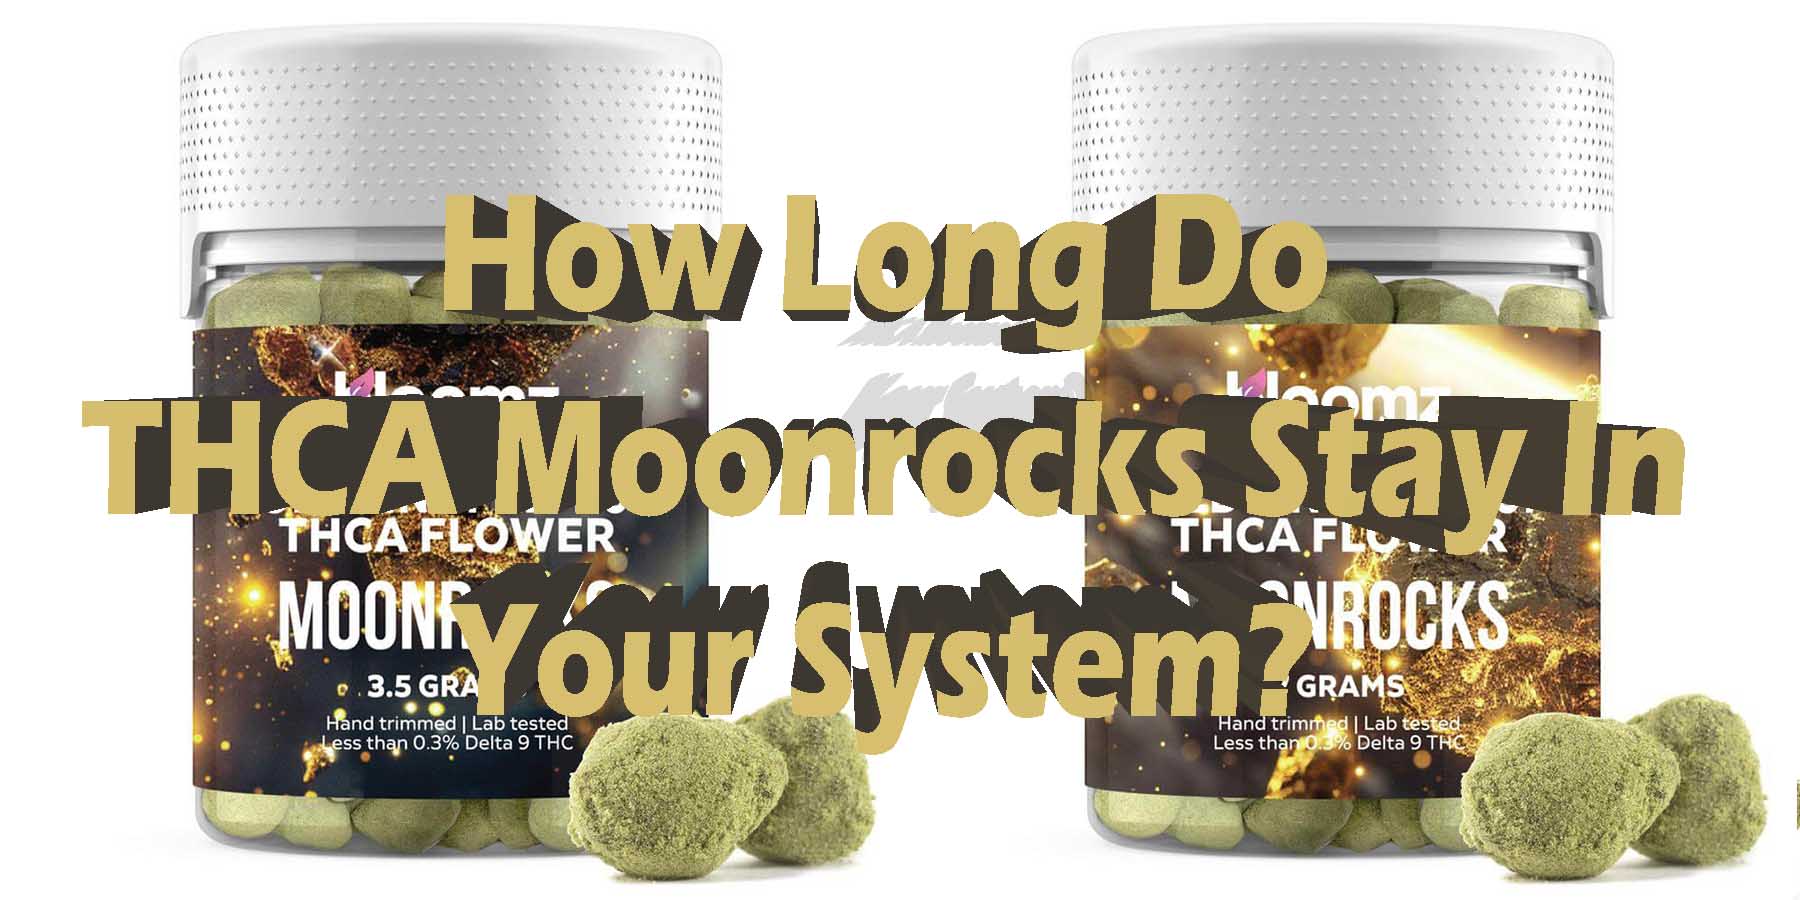 How Long Do THCA Moonrocks Stay In Your System WhereToGet HowToGetNearMe BestPlace LowestPrice Coupon Discount For Smoking Best High Smoke Shop Online Near Me Binoid